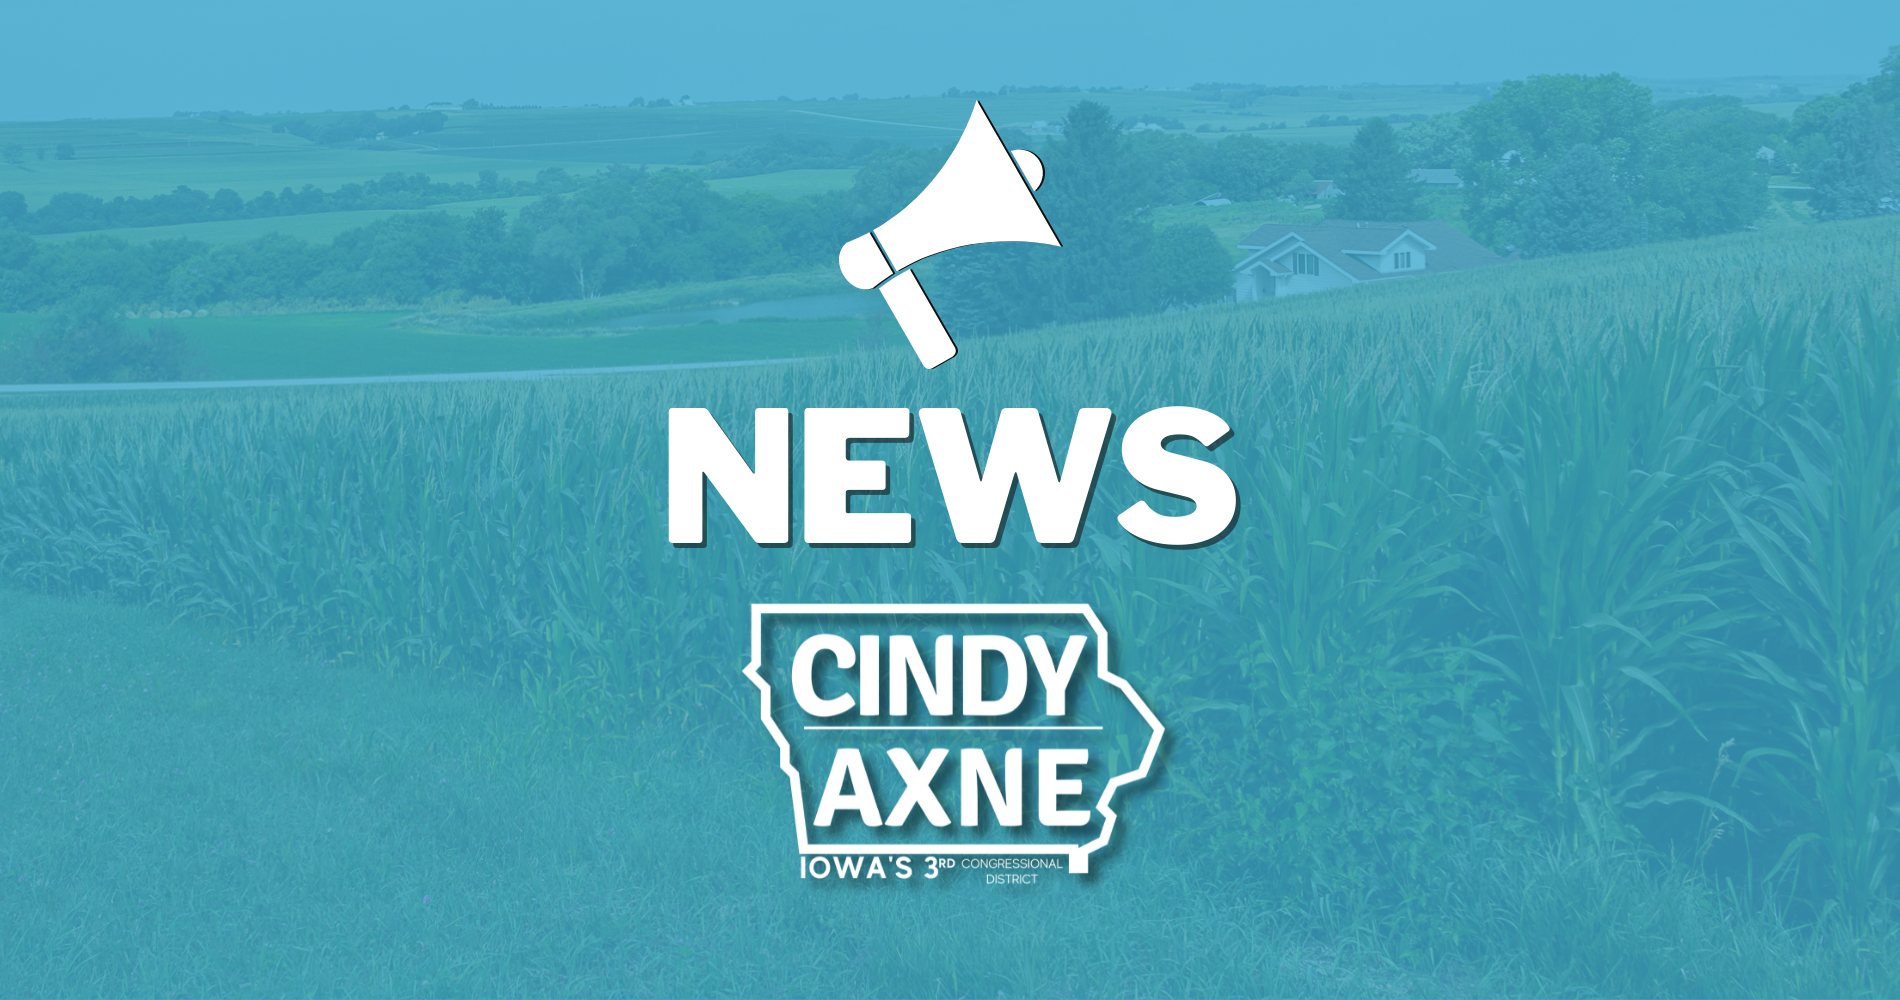 Rep. Axne Votes to Combat Behavioral Health Crisis and Provide Support for Struggling Iowans